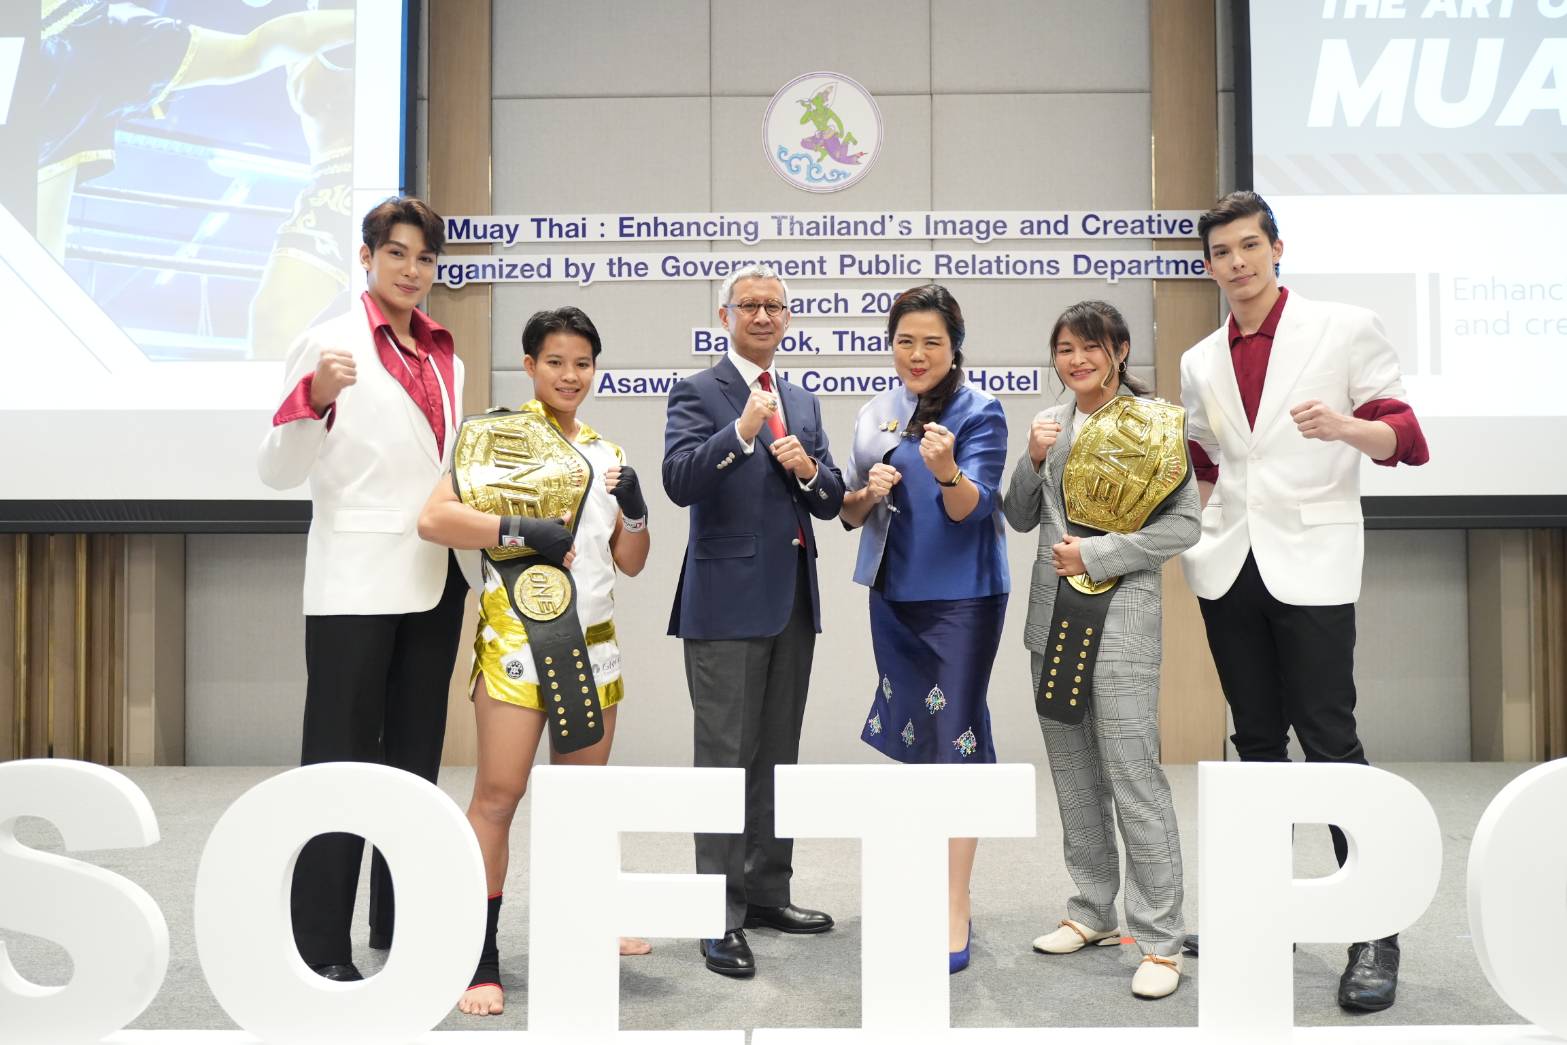 “The Art of Muay Thai: Enhancing Thailand's Image and Creative Economy”